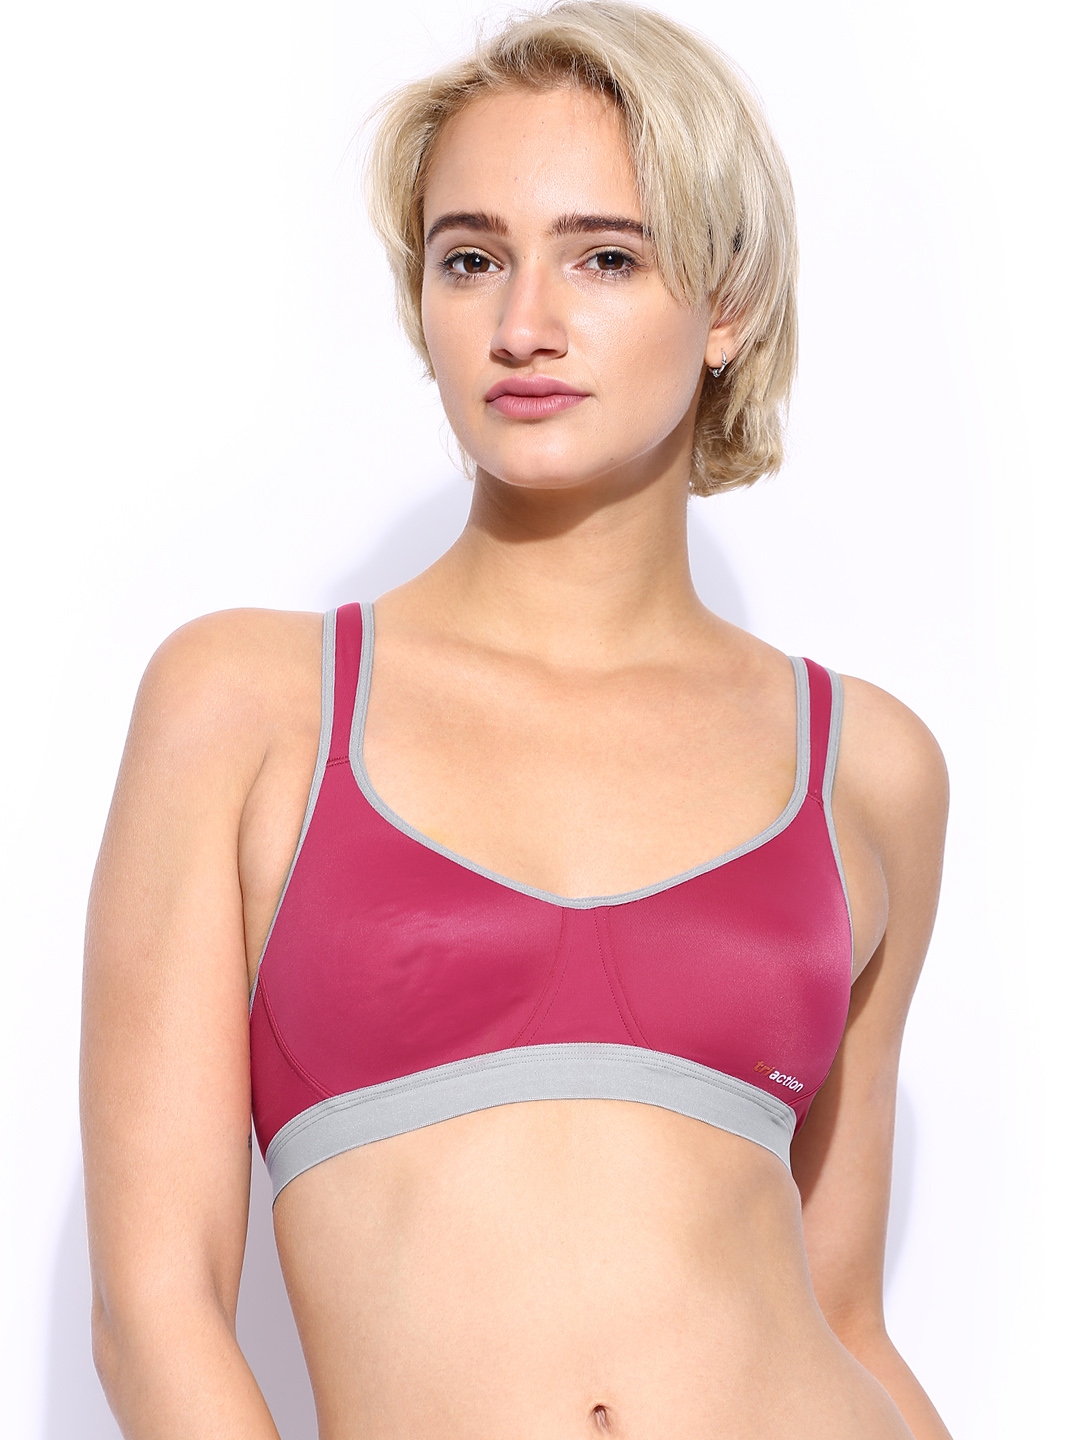 Buy Triumph Triaction 36 Padded Wireless Racer Back High Bounce Control Sports Bra Bra For 